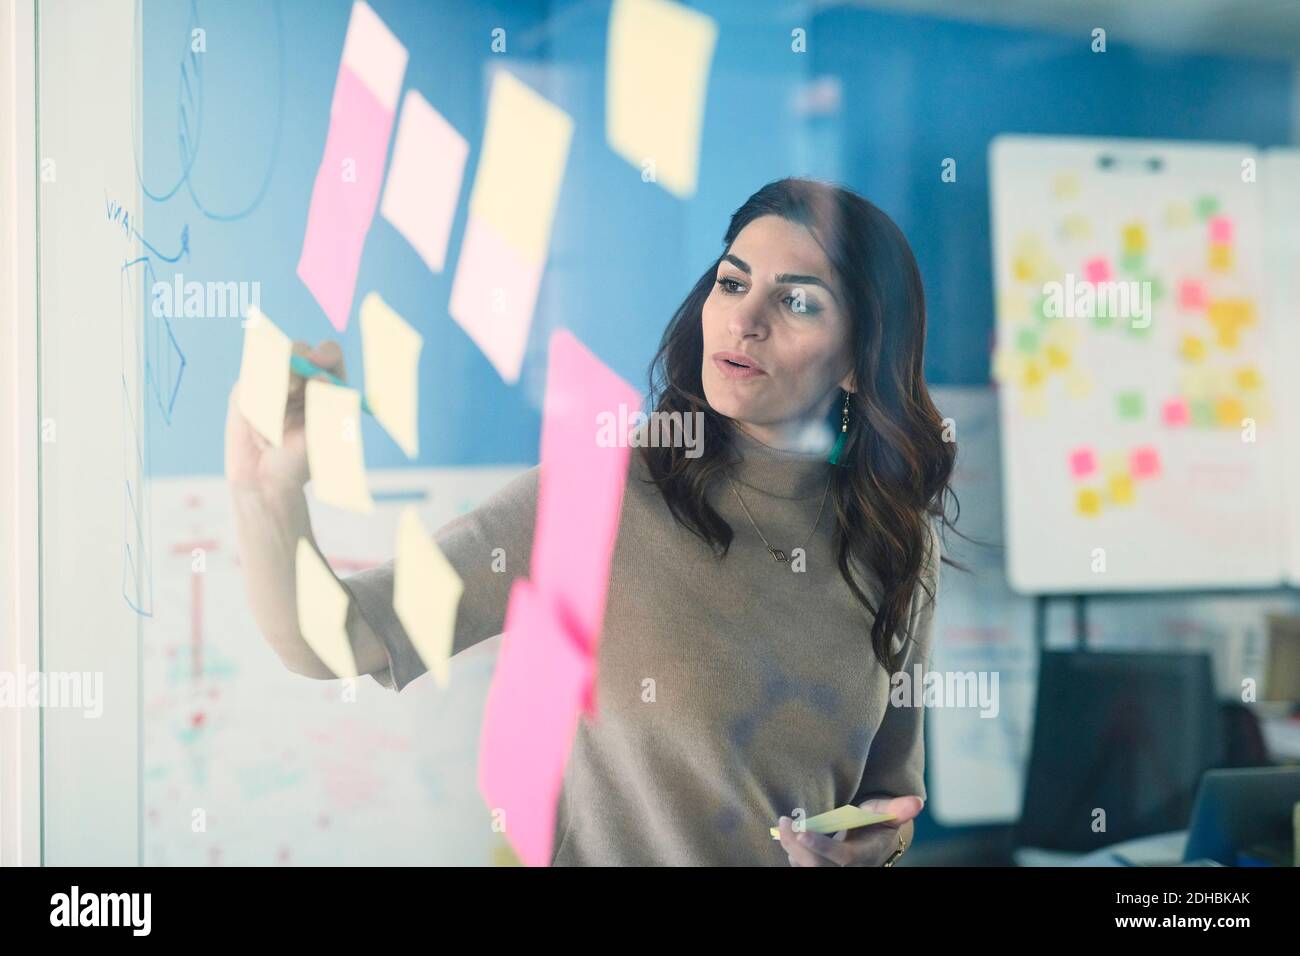 Female mature engineer writing on adhesive note stuck to glass in office Stock Photo